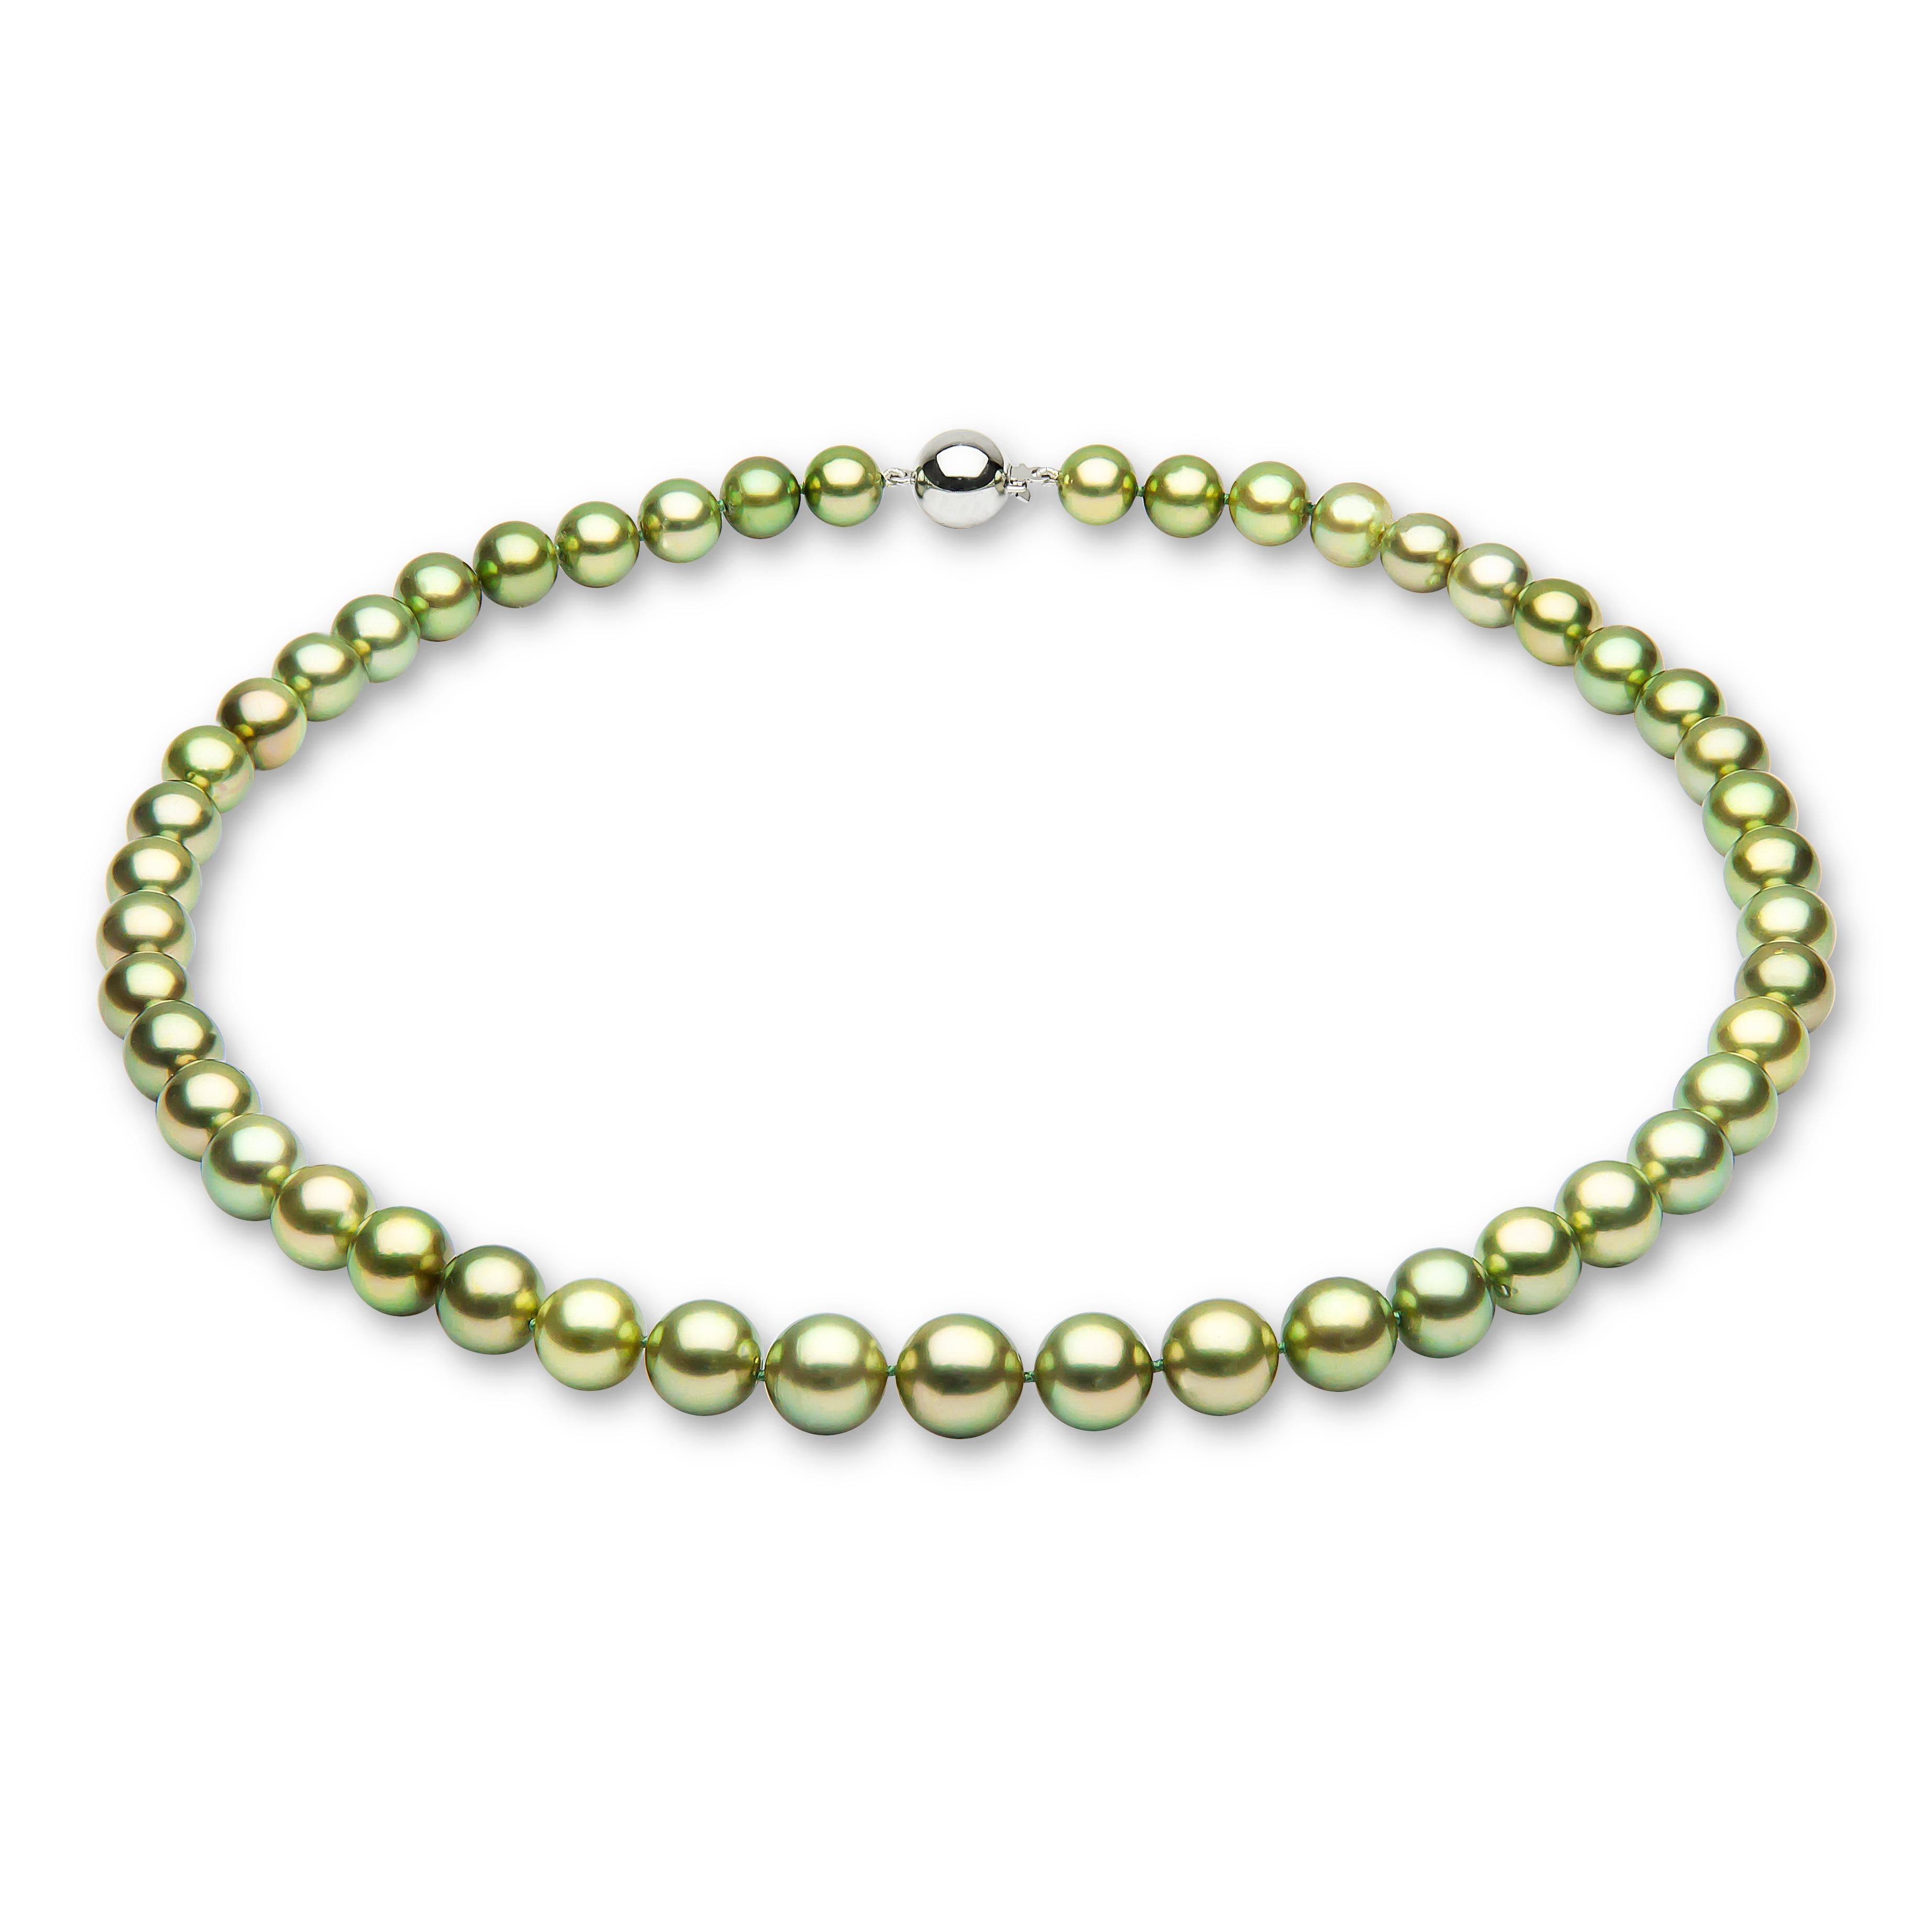 This spectacular necklace from Yoko London features a row of lustrous Pistachio-Coloured Tahitian pearls which softly graduate in size from 8 - 10.1mm allowing the necklace to sit elegantly upon its wearer’s neck. Completed with an 18 Karat white